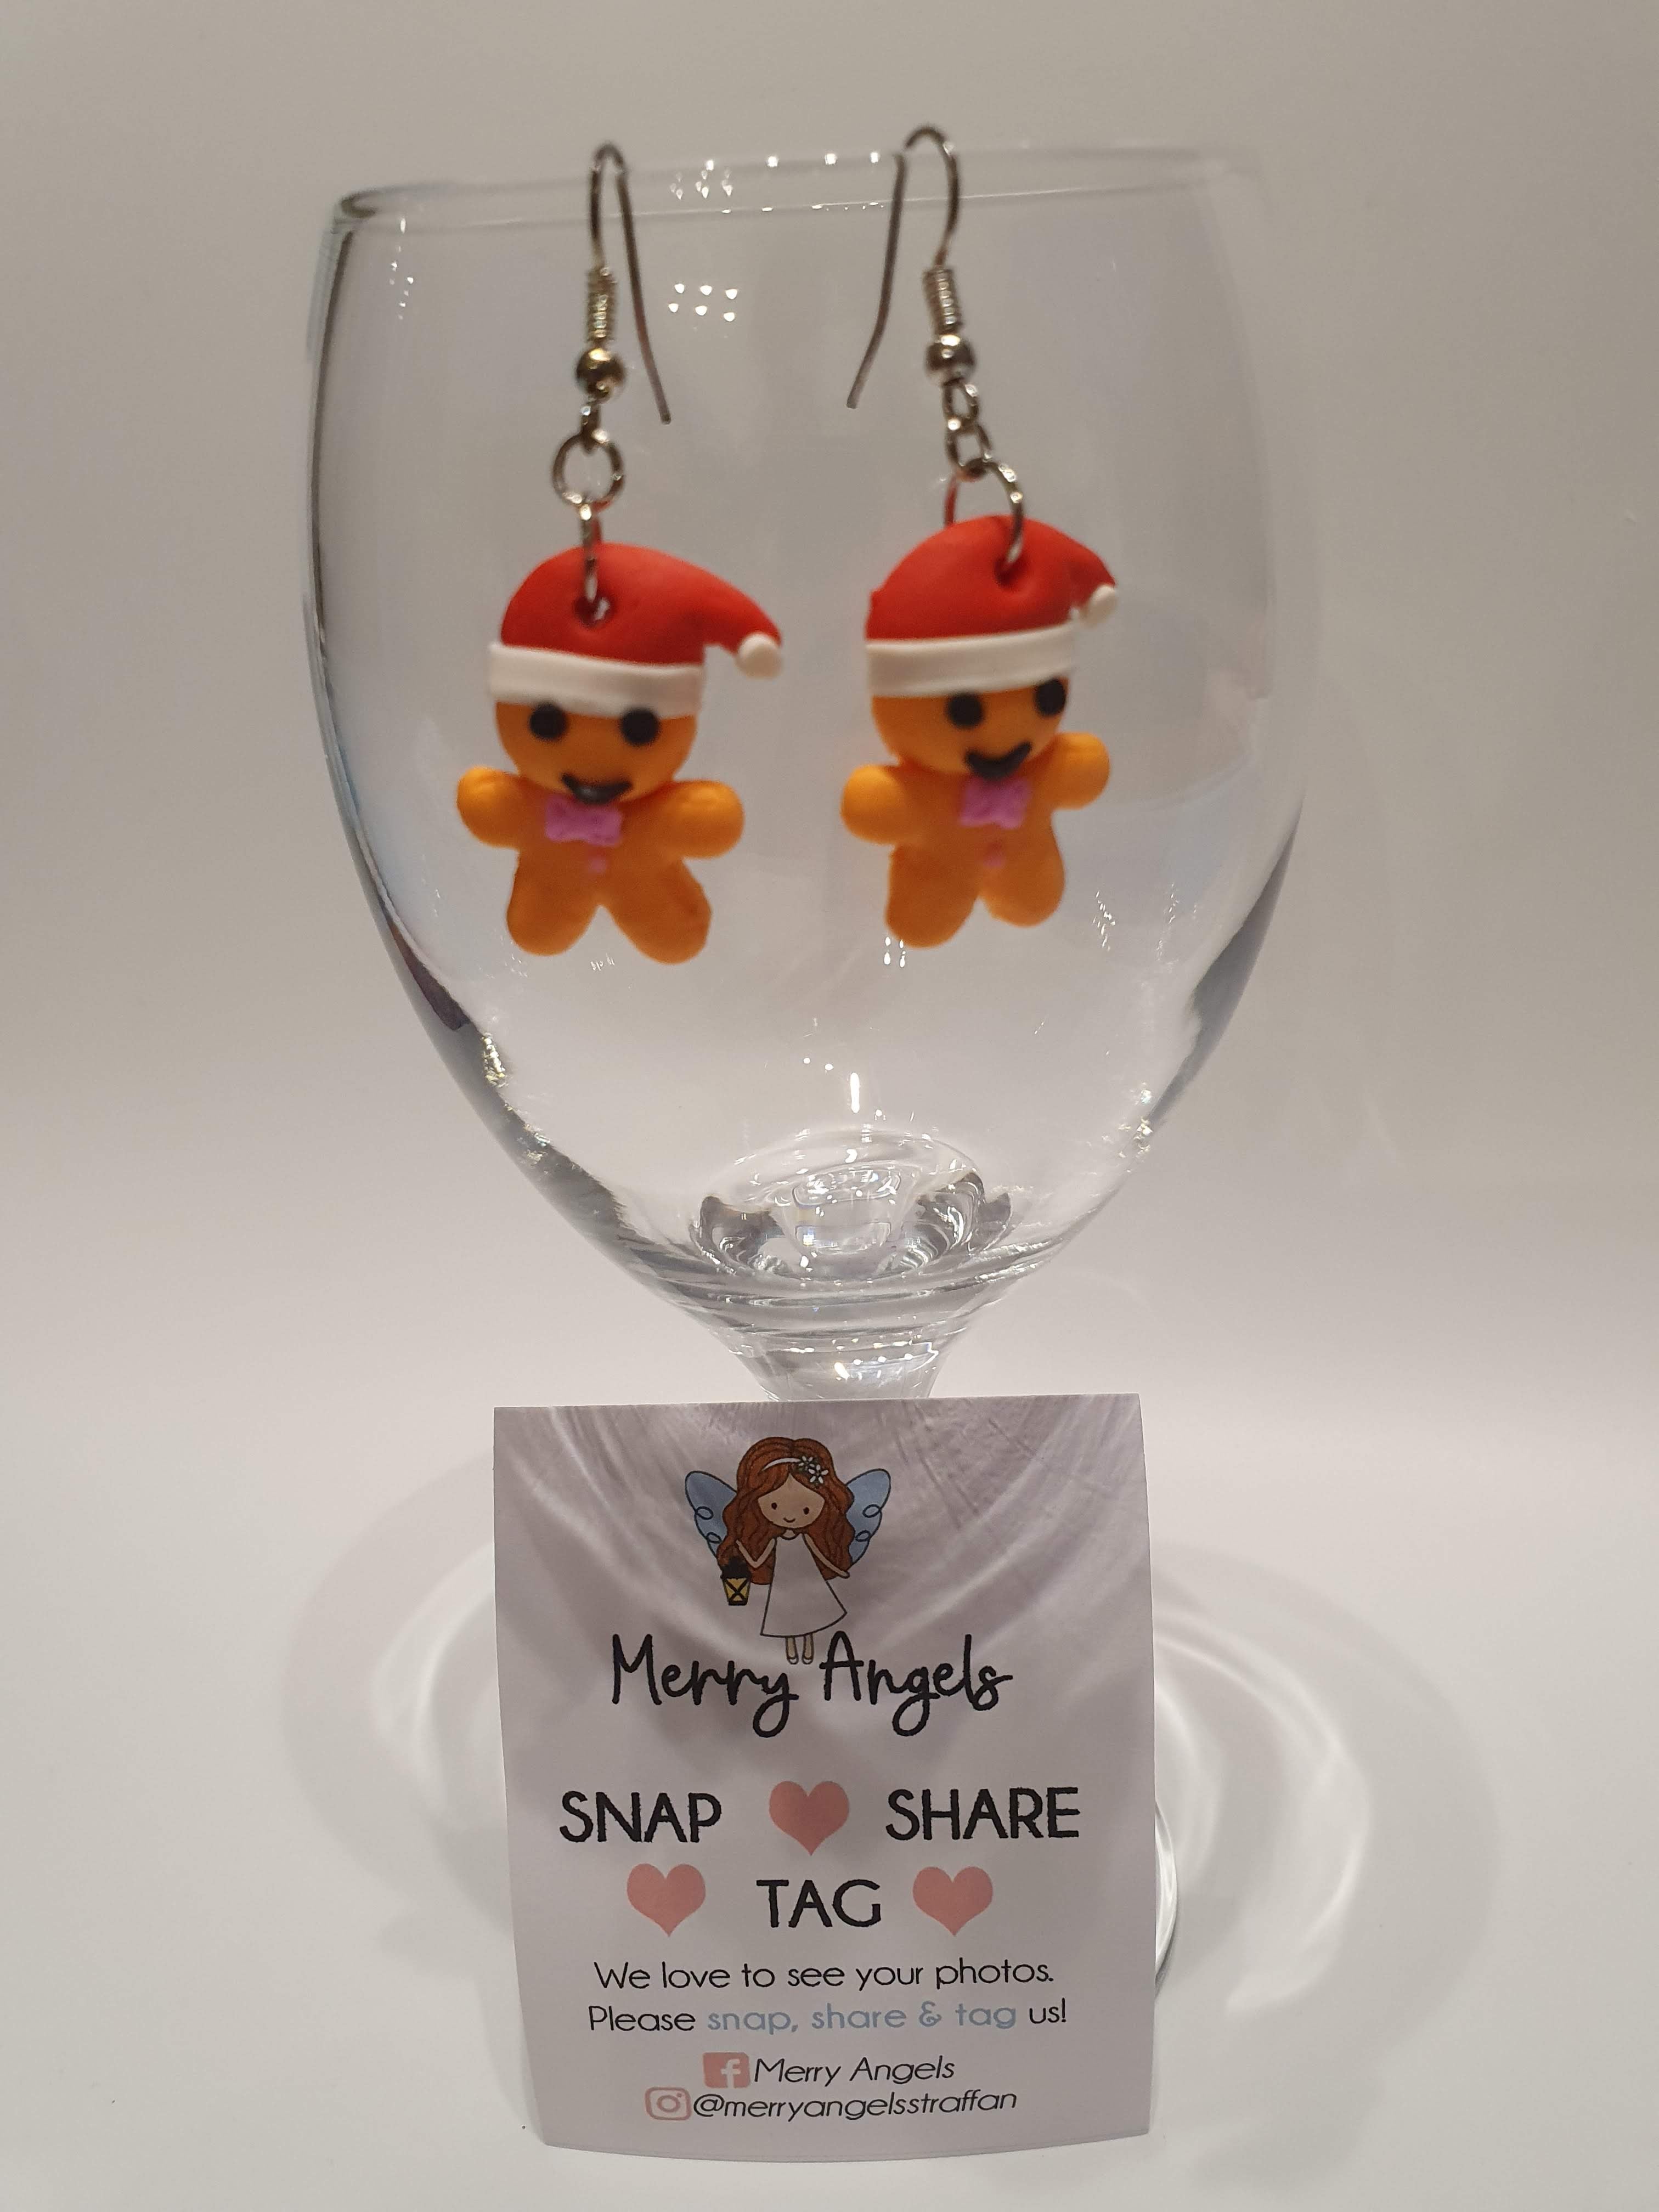 This is a picture of a pair of gingerbread man earrings hanging over a wine glass